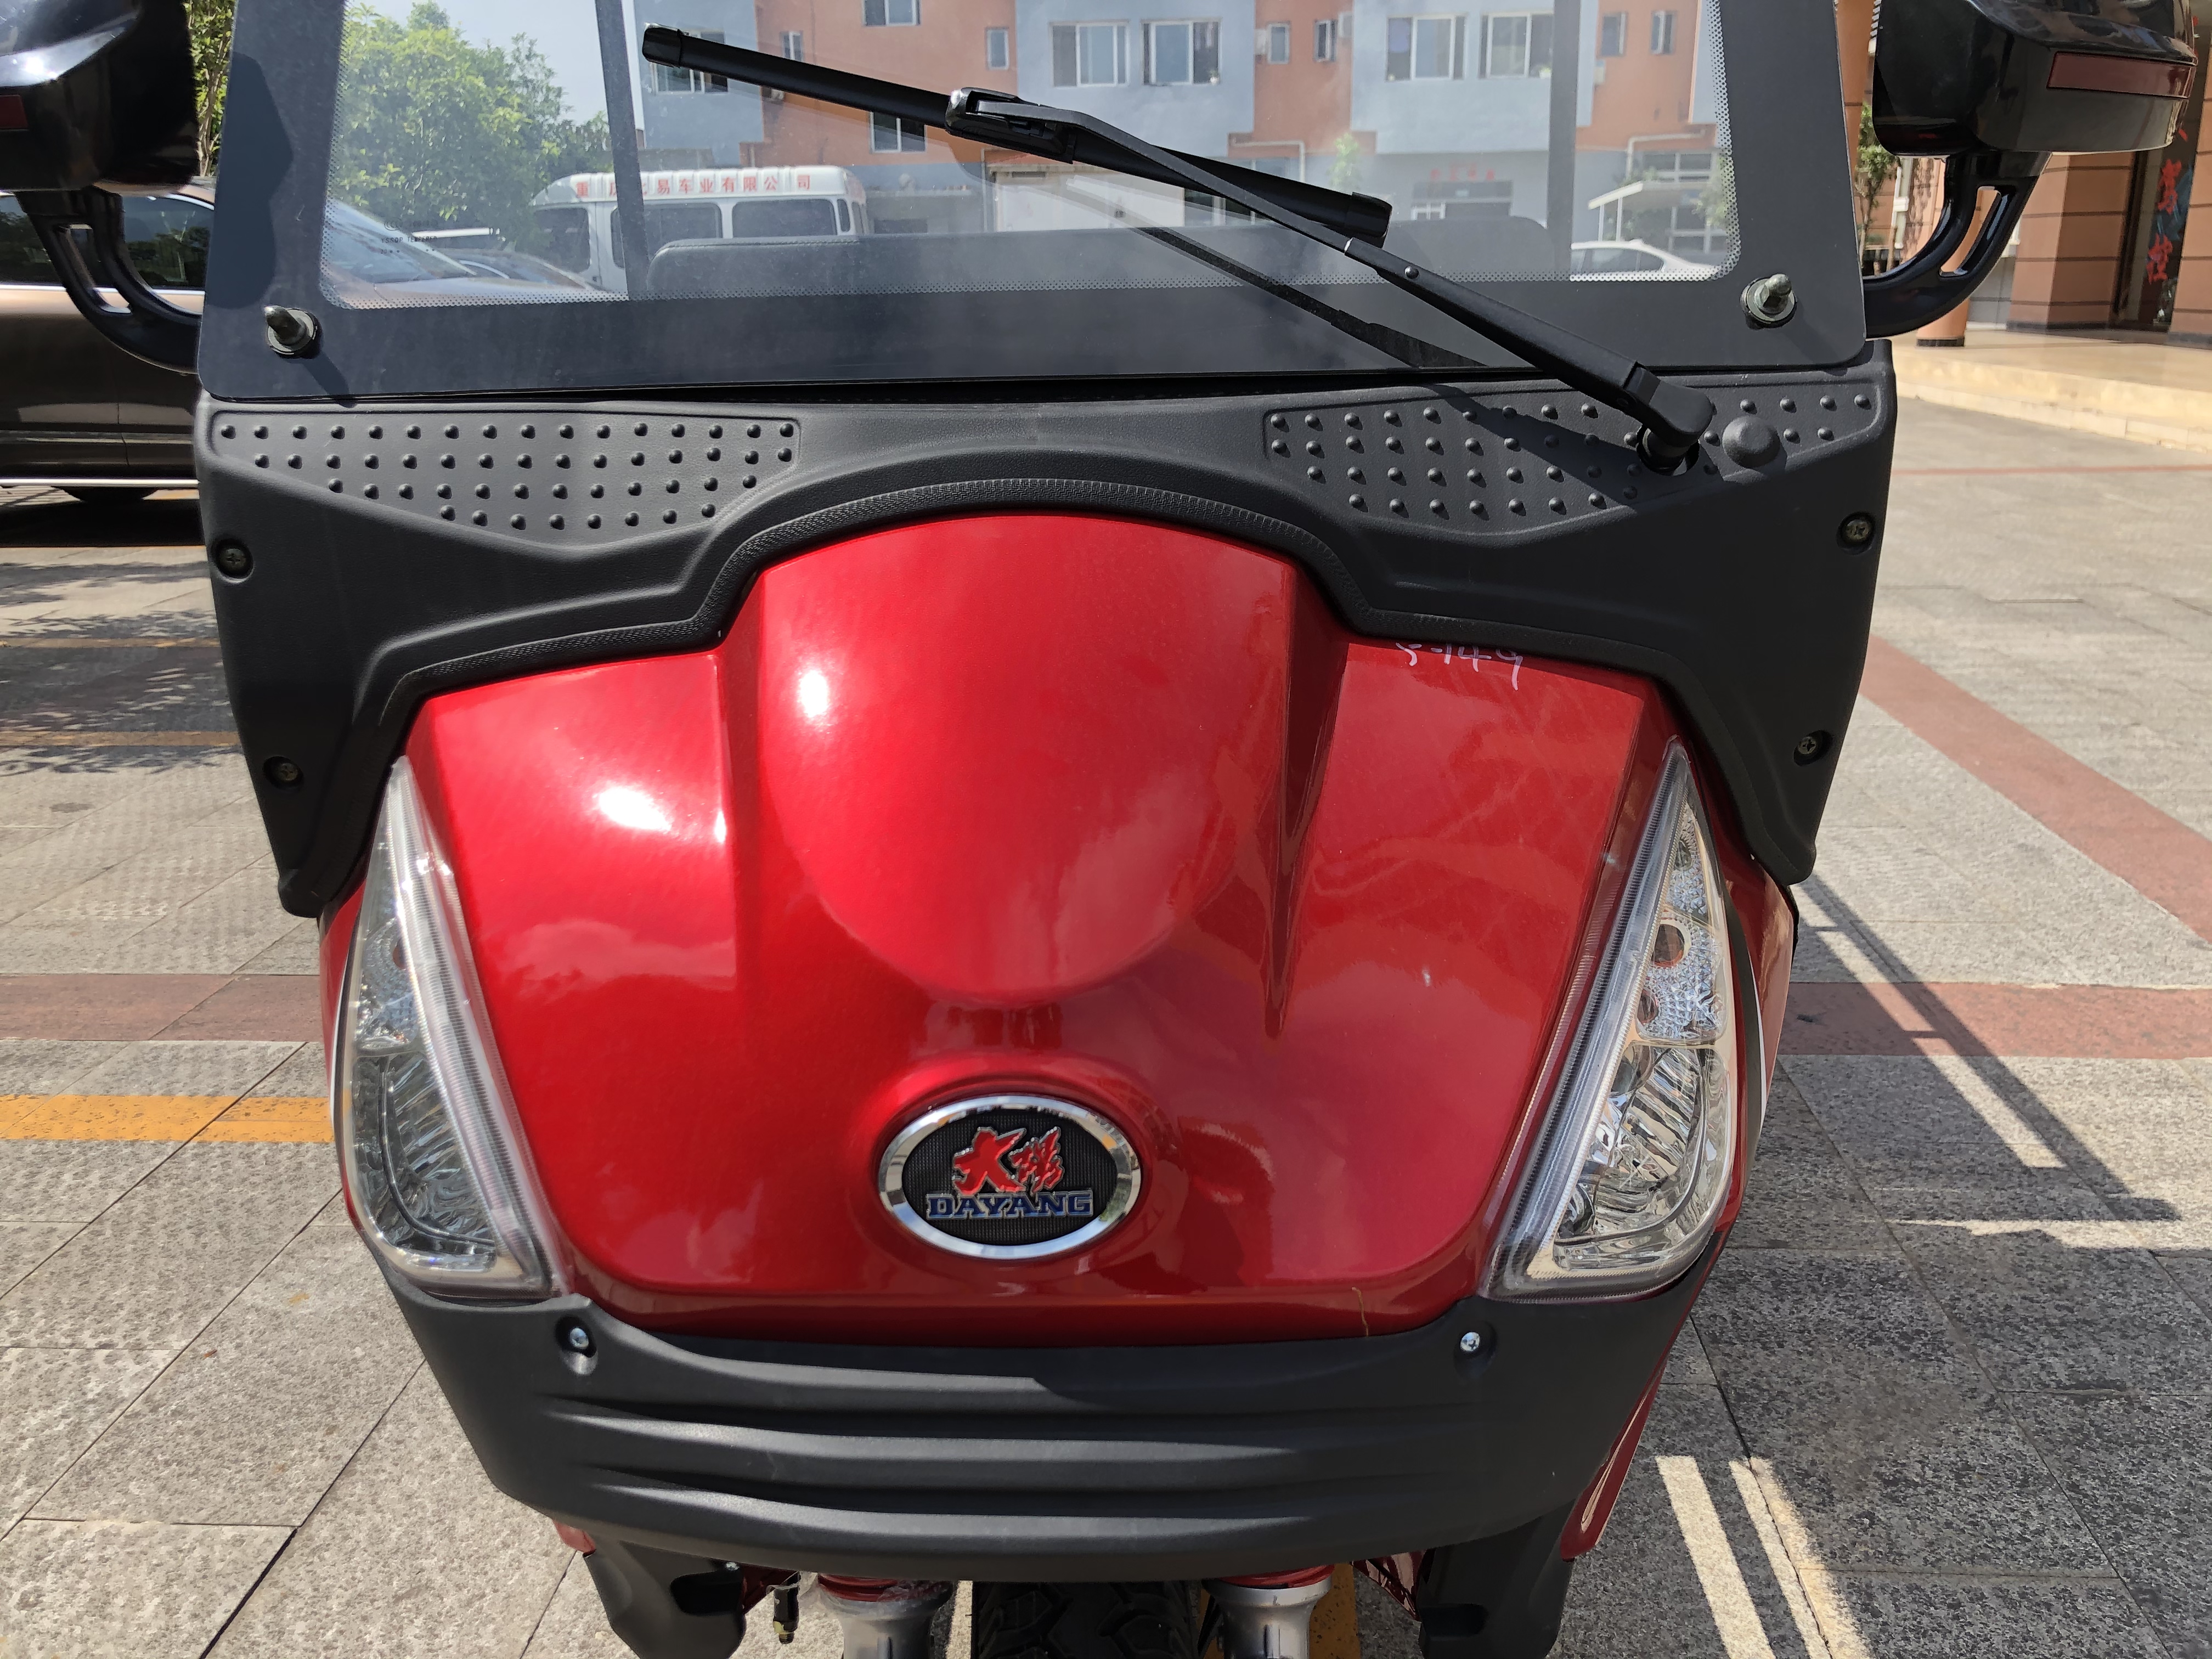 DY-Z2A 200CC LIFAN engine cargo tricycle motorcycle sells well at Africa